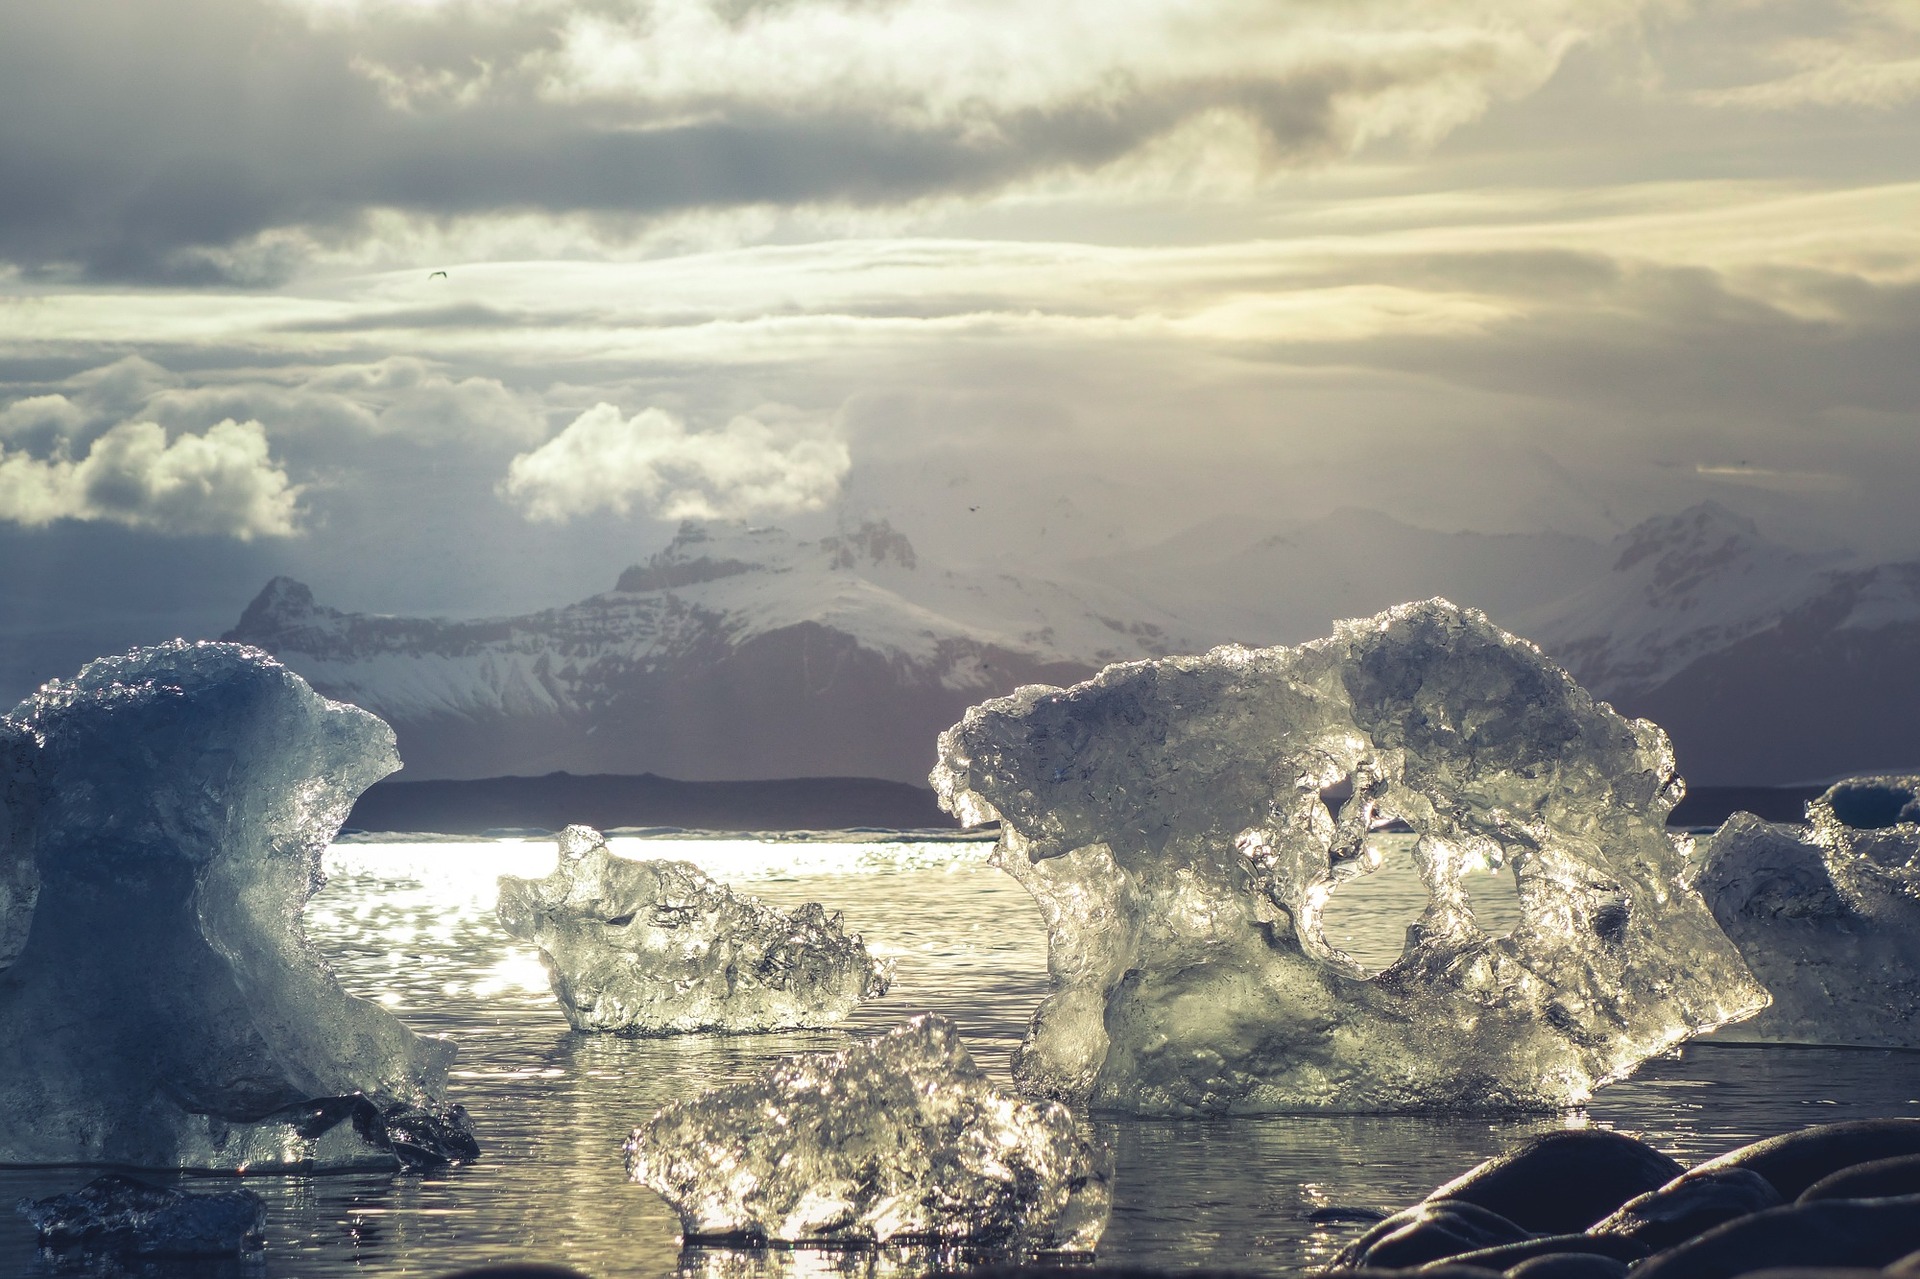 Chunks of melting ice floating in the arctic ocean, mountains in the distance